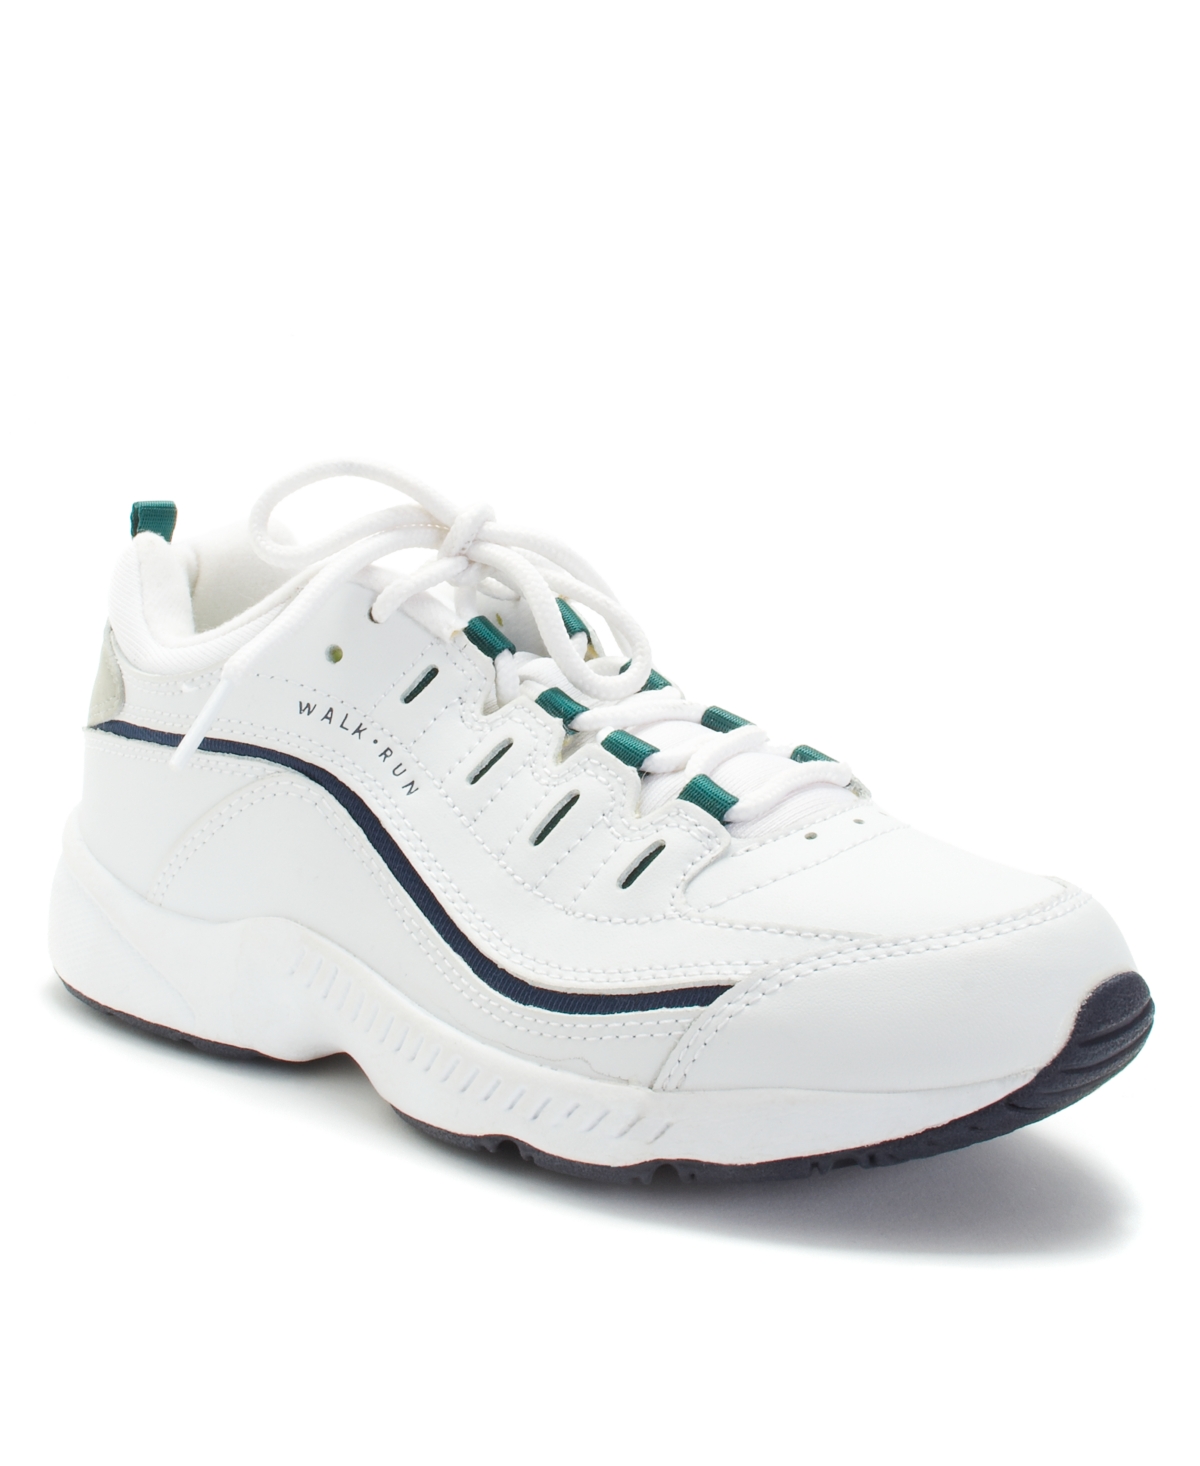 UPC 029005264279 product image for Easy Spirit Women's Romy Round Toe Casual Lace Up Walking Shoes Women's Shoes | upcitemdb.com